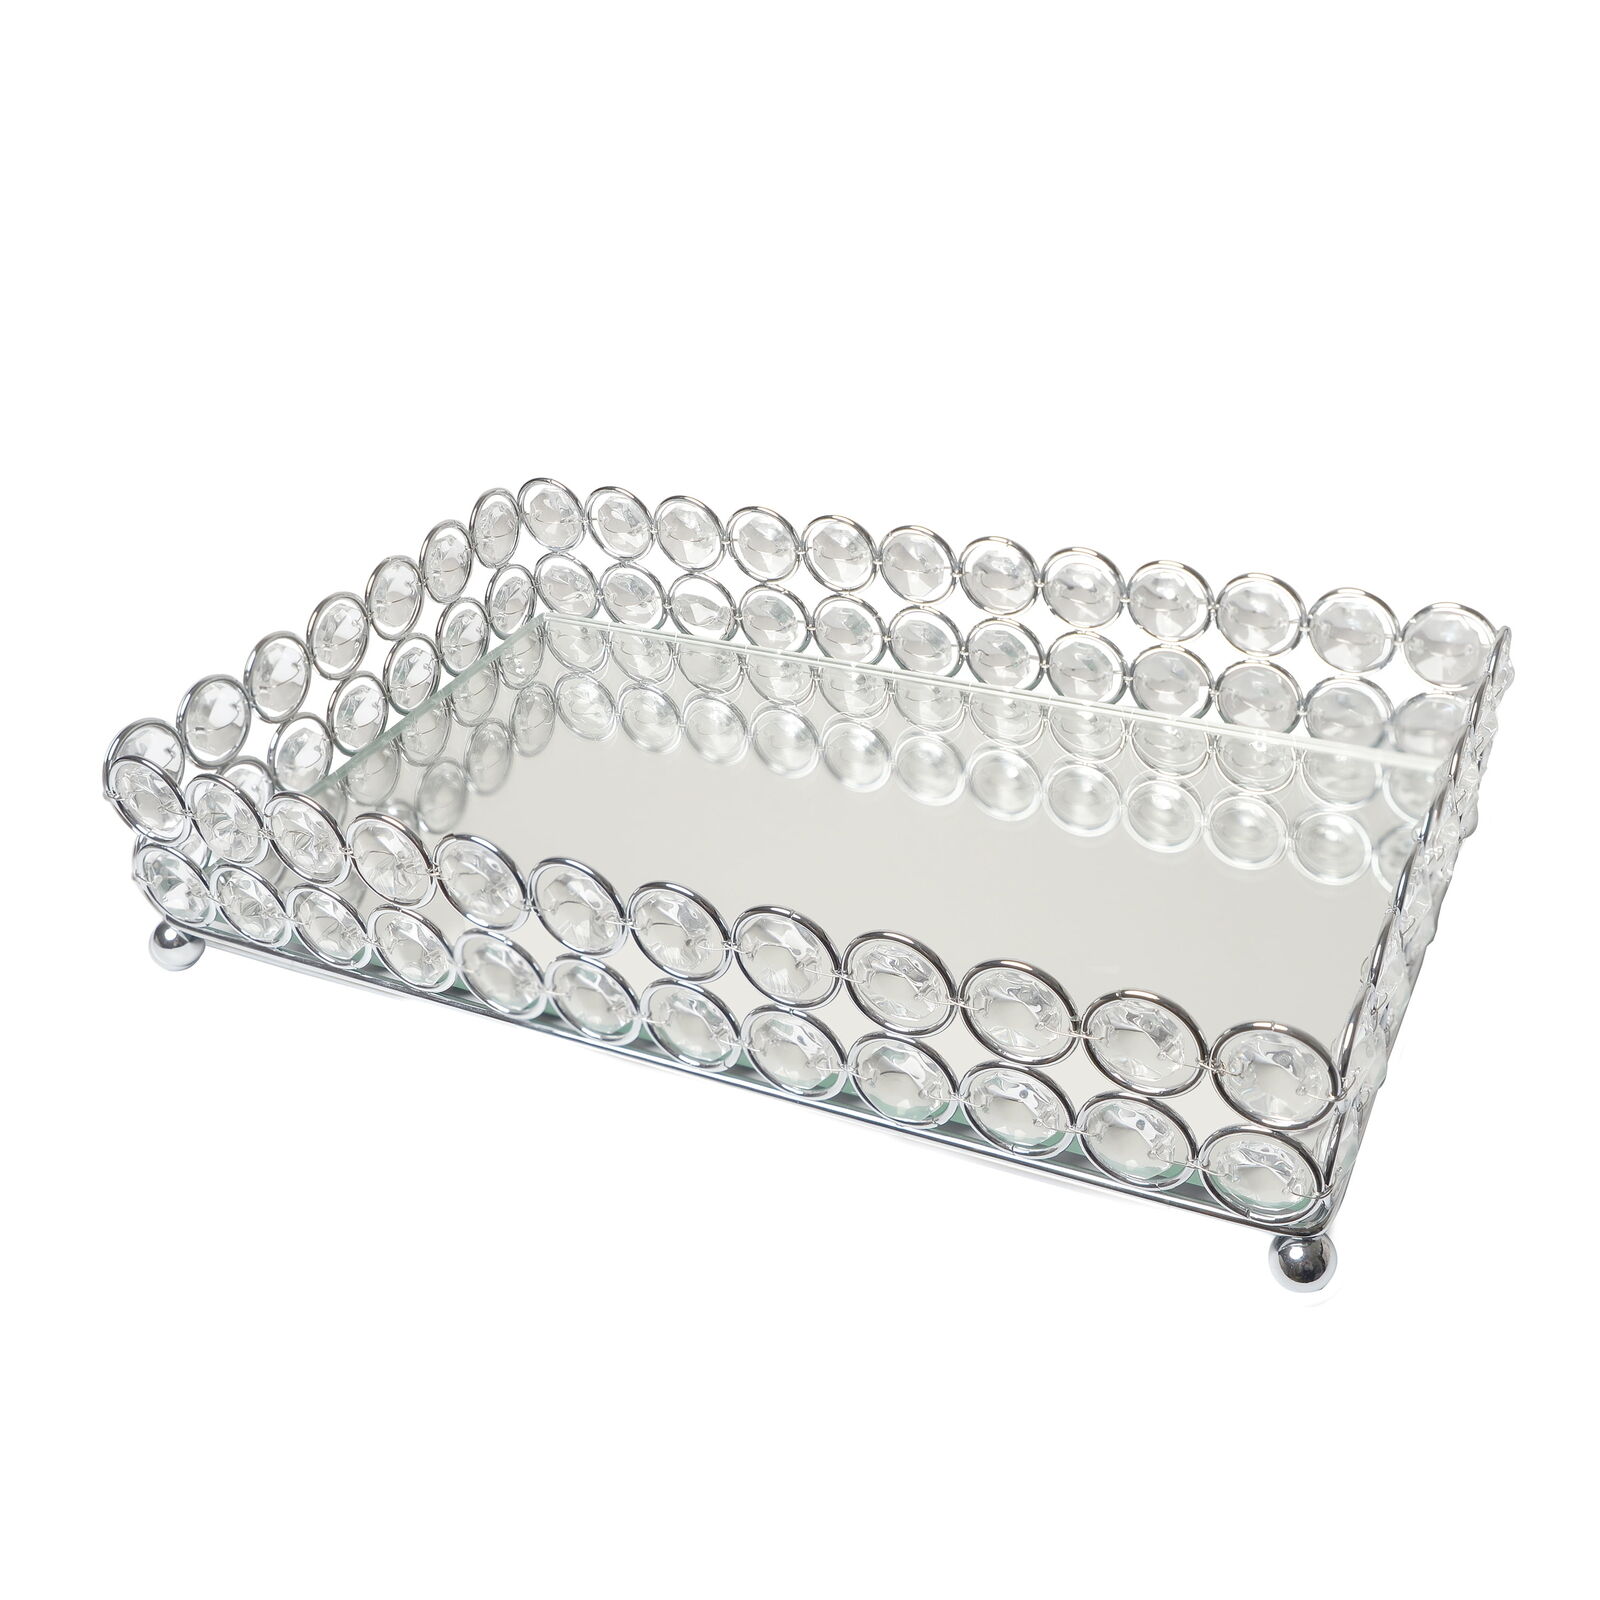 10.5 Inch Elipse Crystal Decorative Mirrored Vanity Tray Chrome